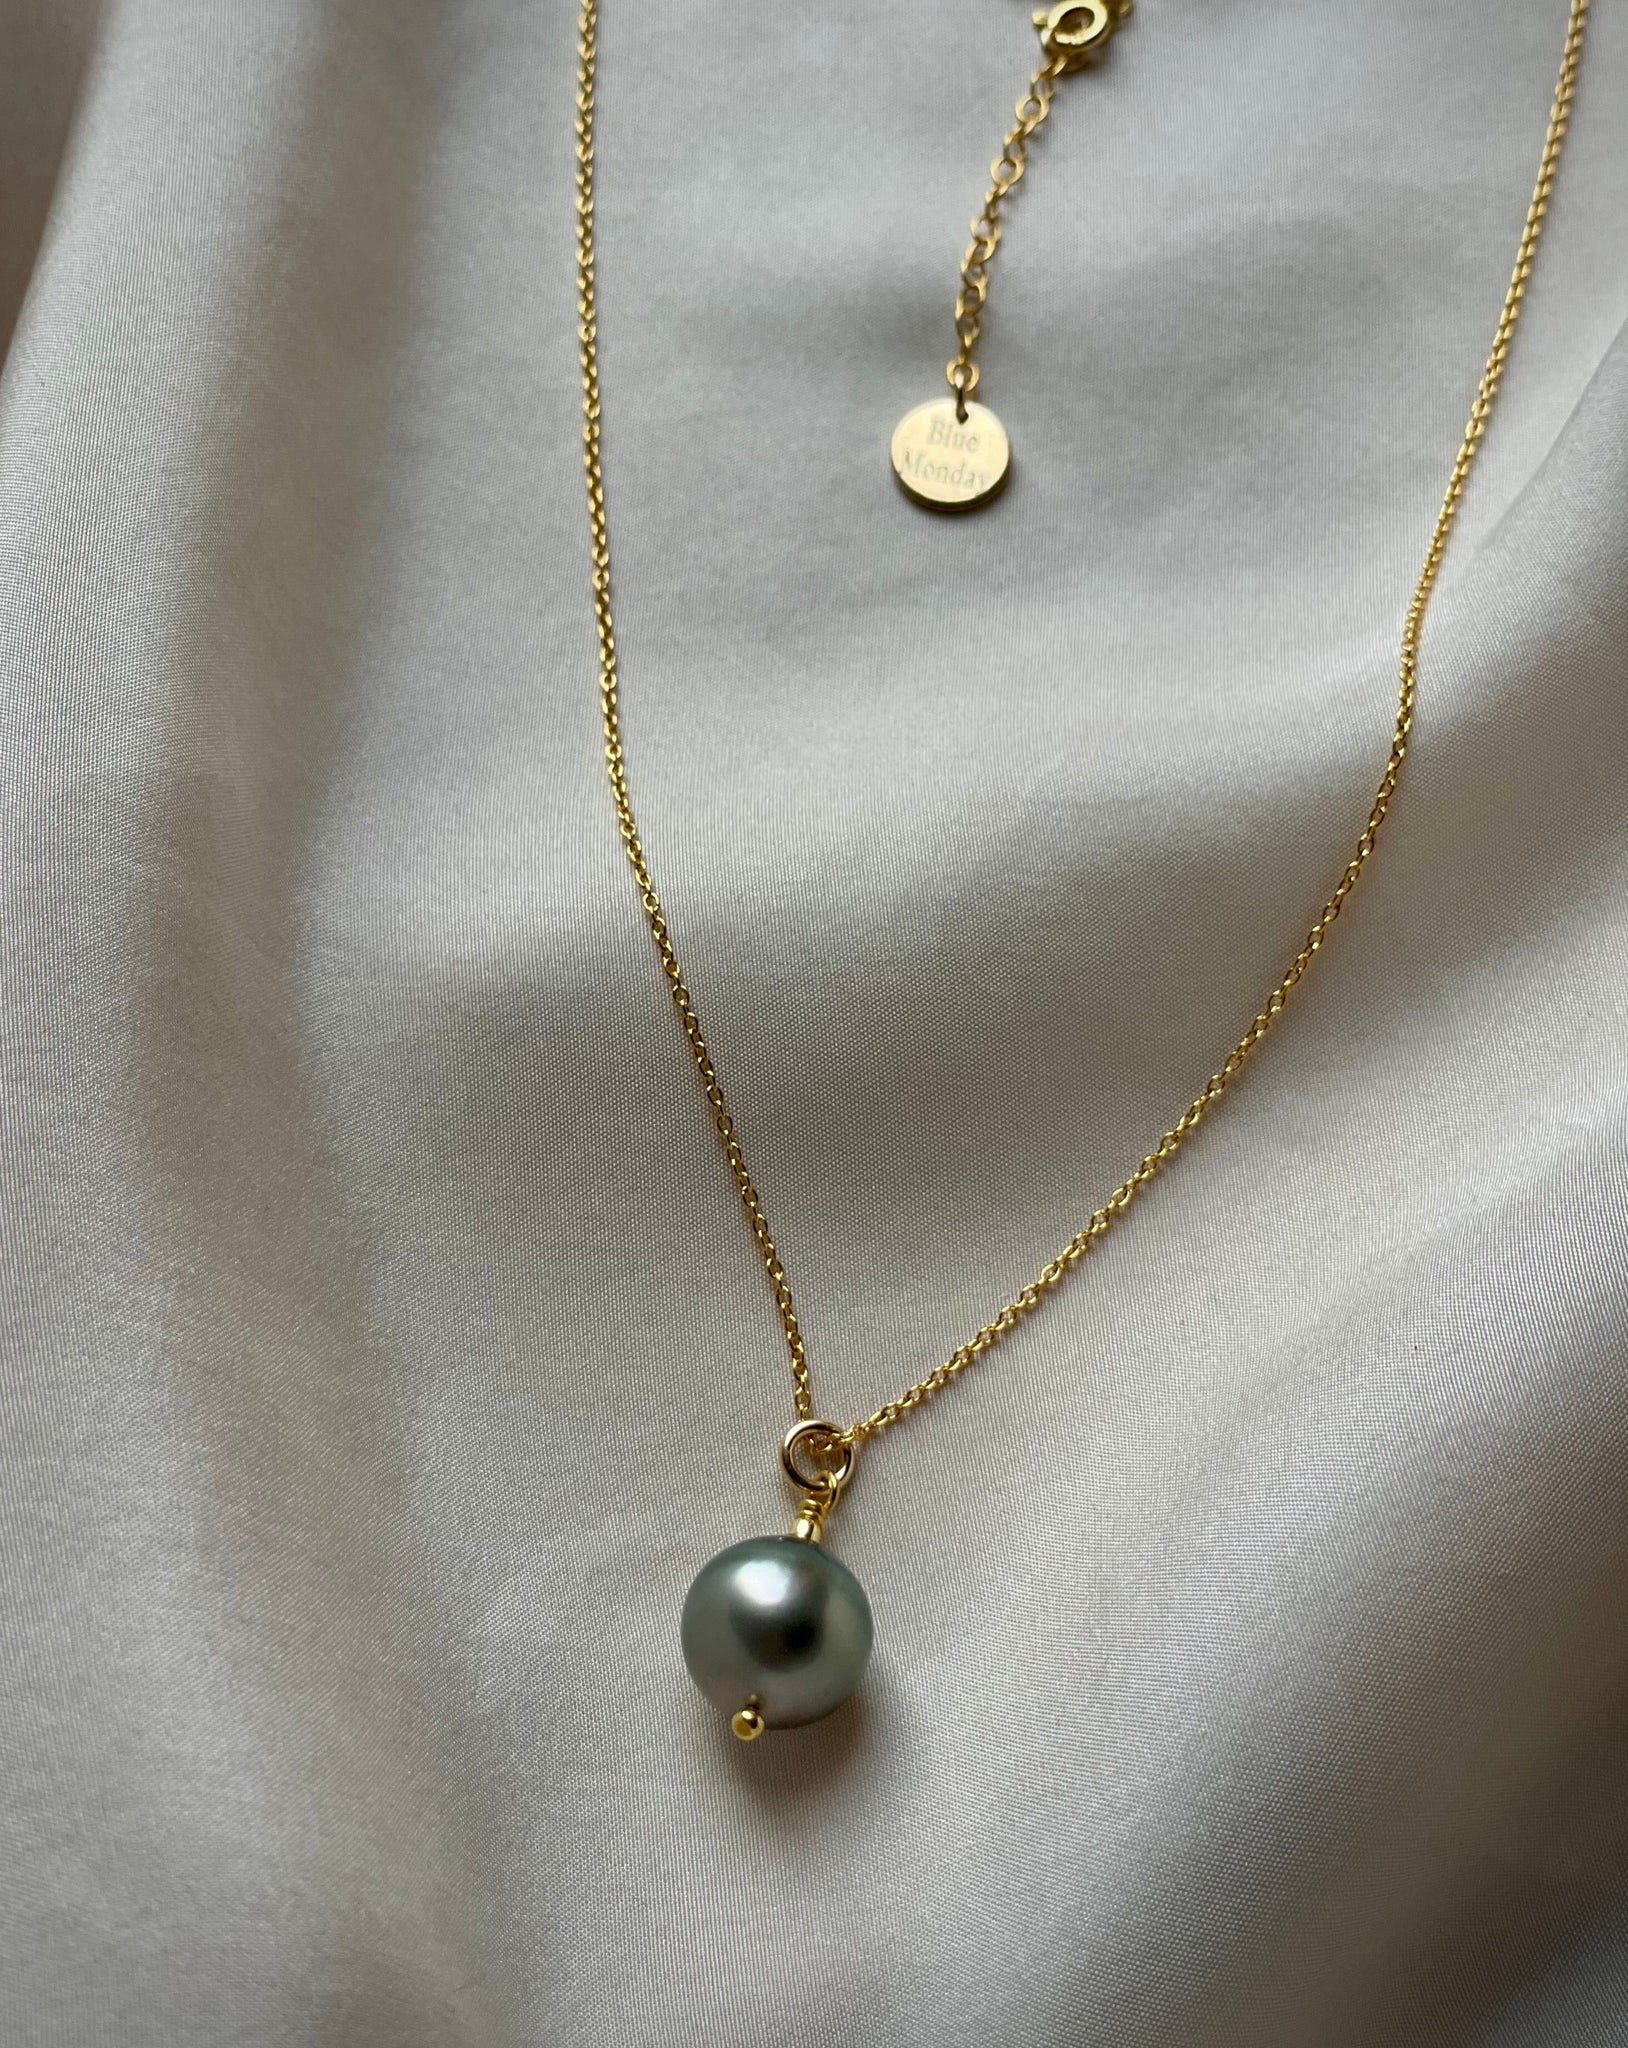 Exclusive South sea pearl Necklace in Gold and Grey natural finish –